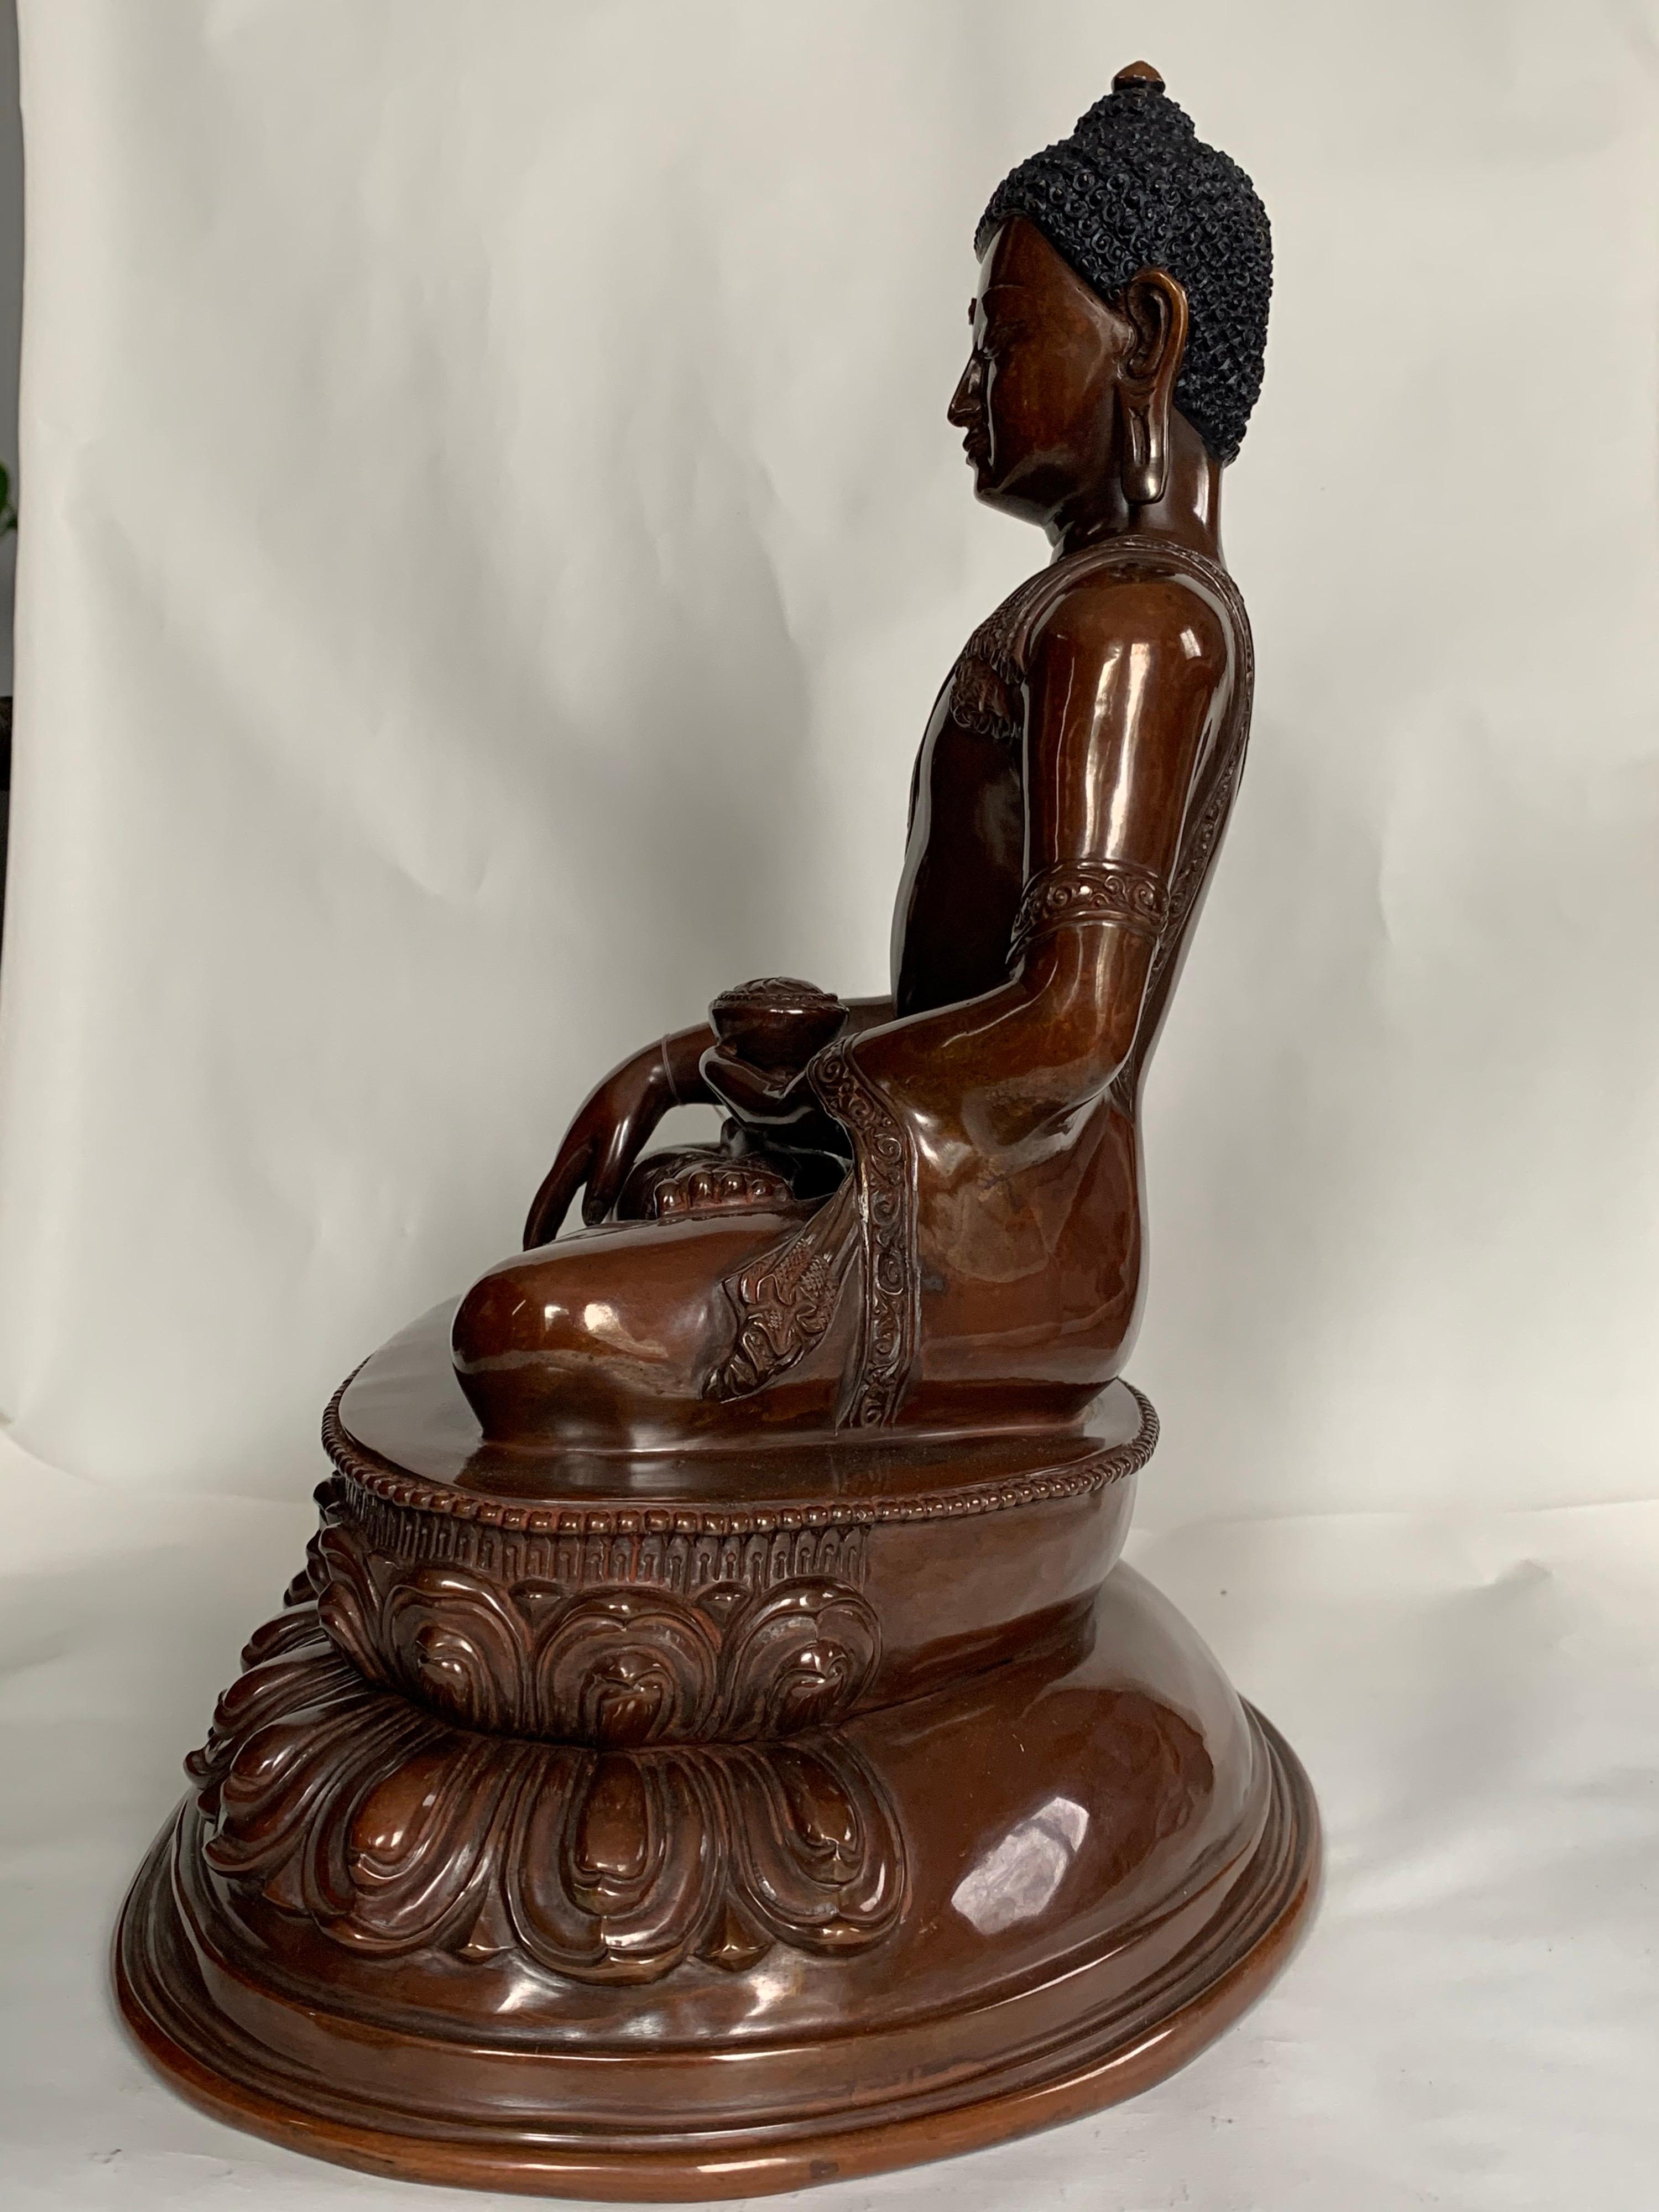 This statue is handcrafted by lost wax process which is one of the ancient process of metal craft. Buddha is seated in 